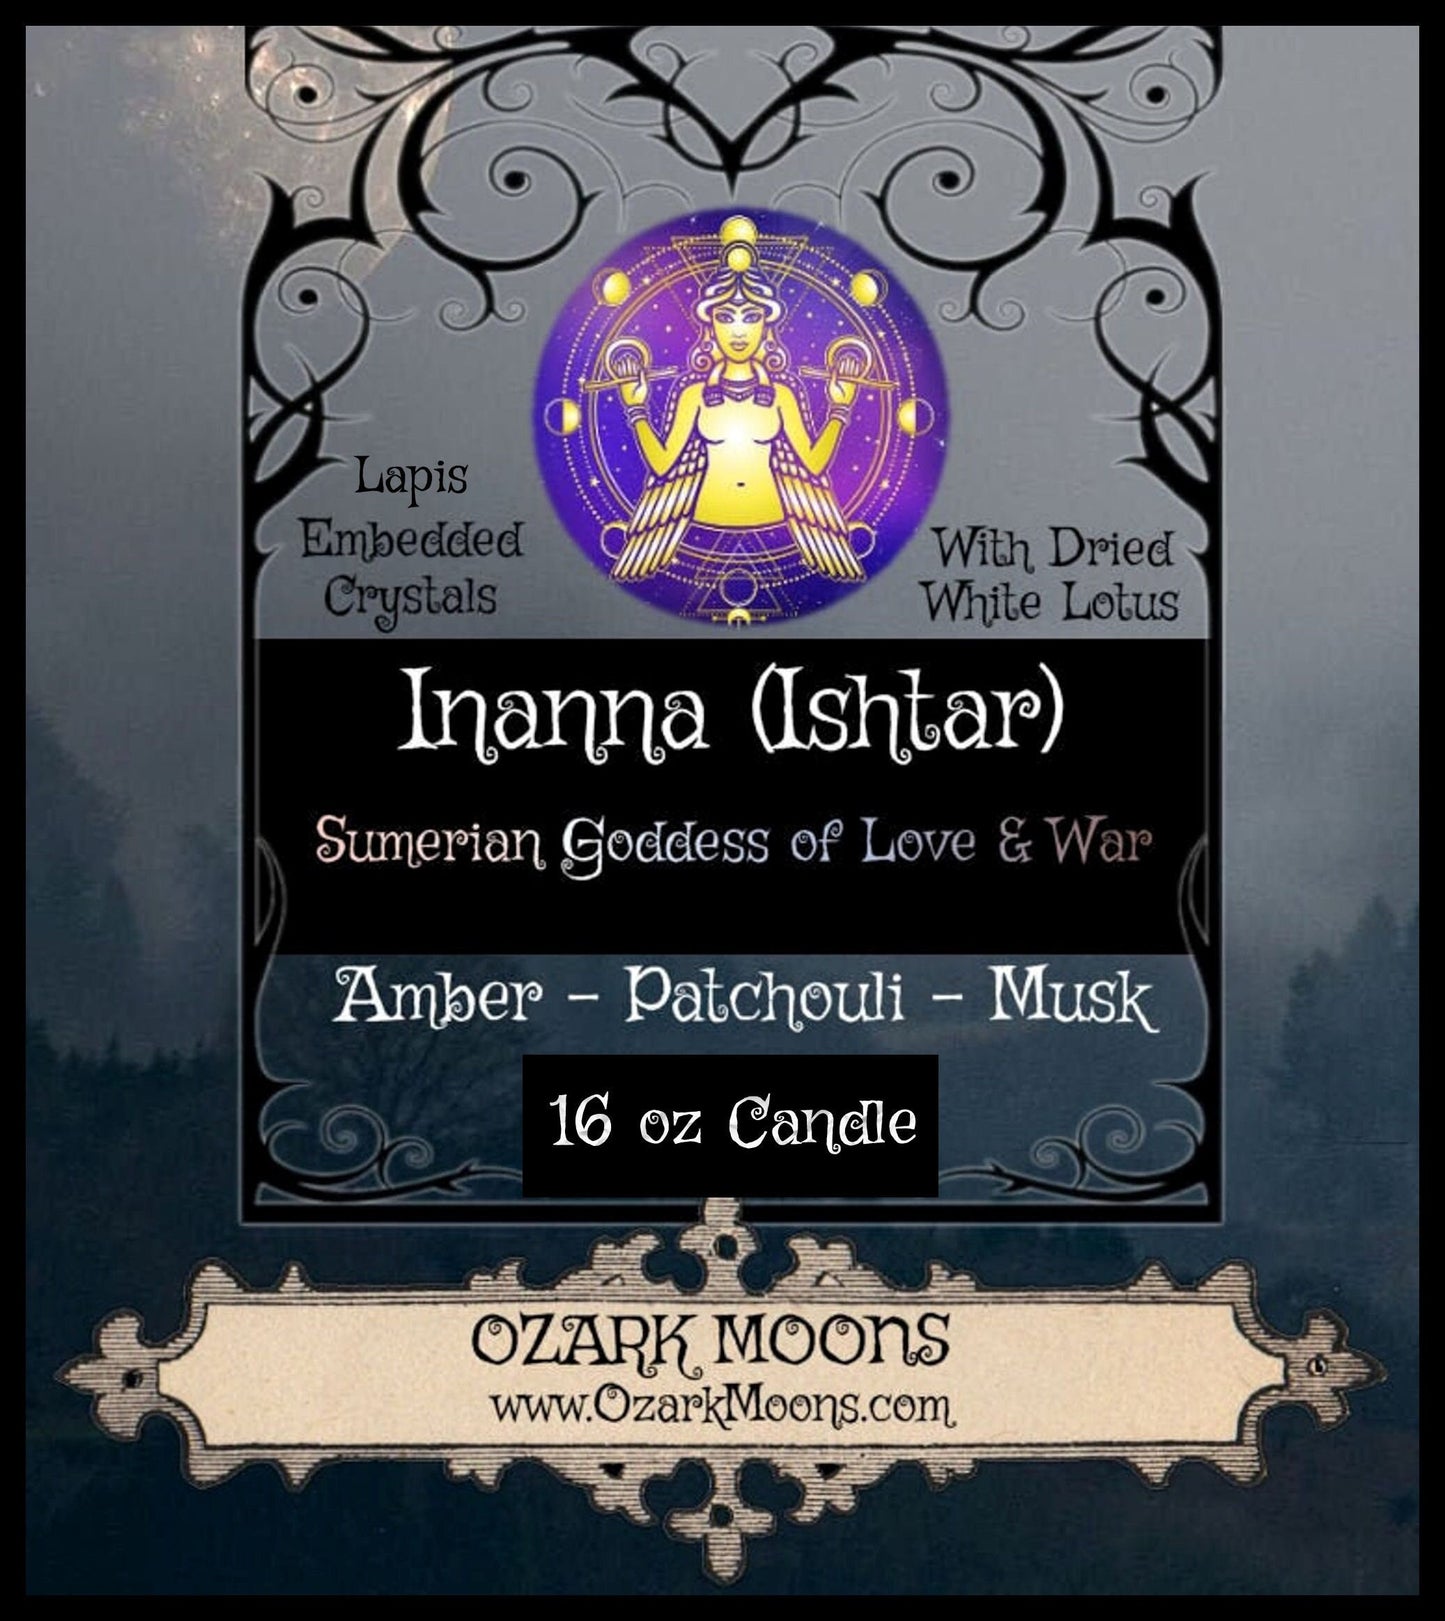 INANNA (Ishtar) 16oz Sumerian Goddess of Love and War Ritual Candle - Amber & Musk with Lapis Lazuli and White Lotus - Pagan, Wicca, Wiccan